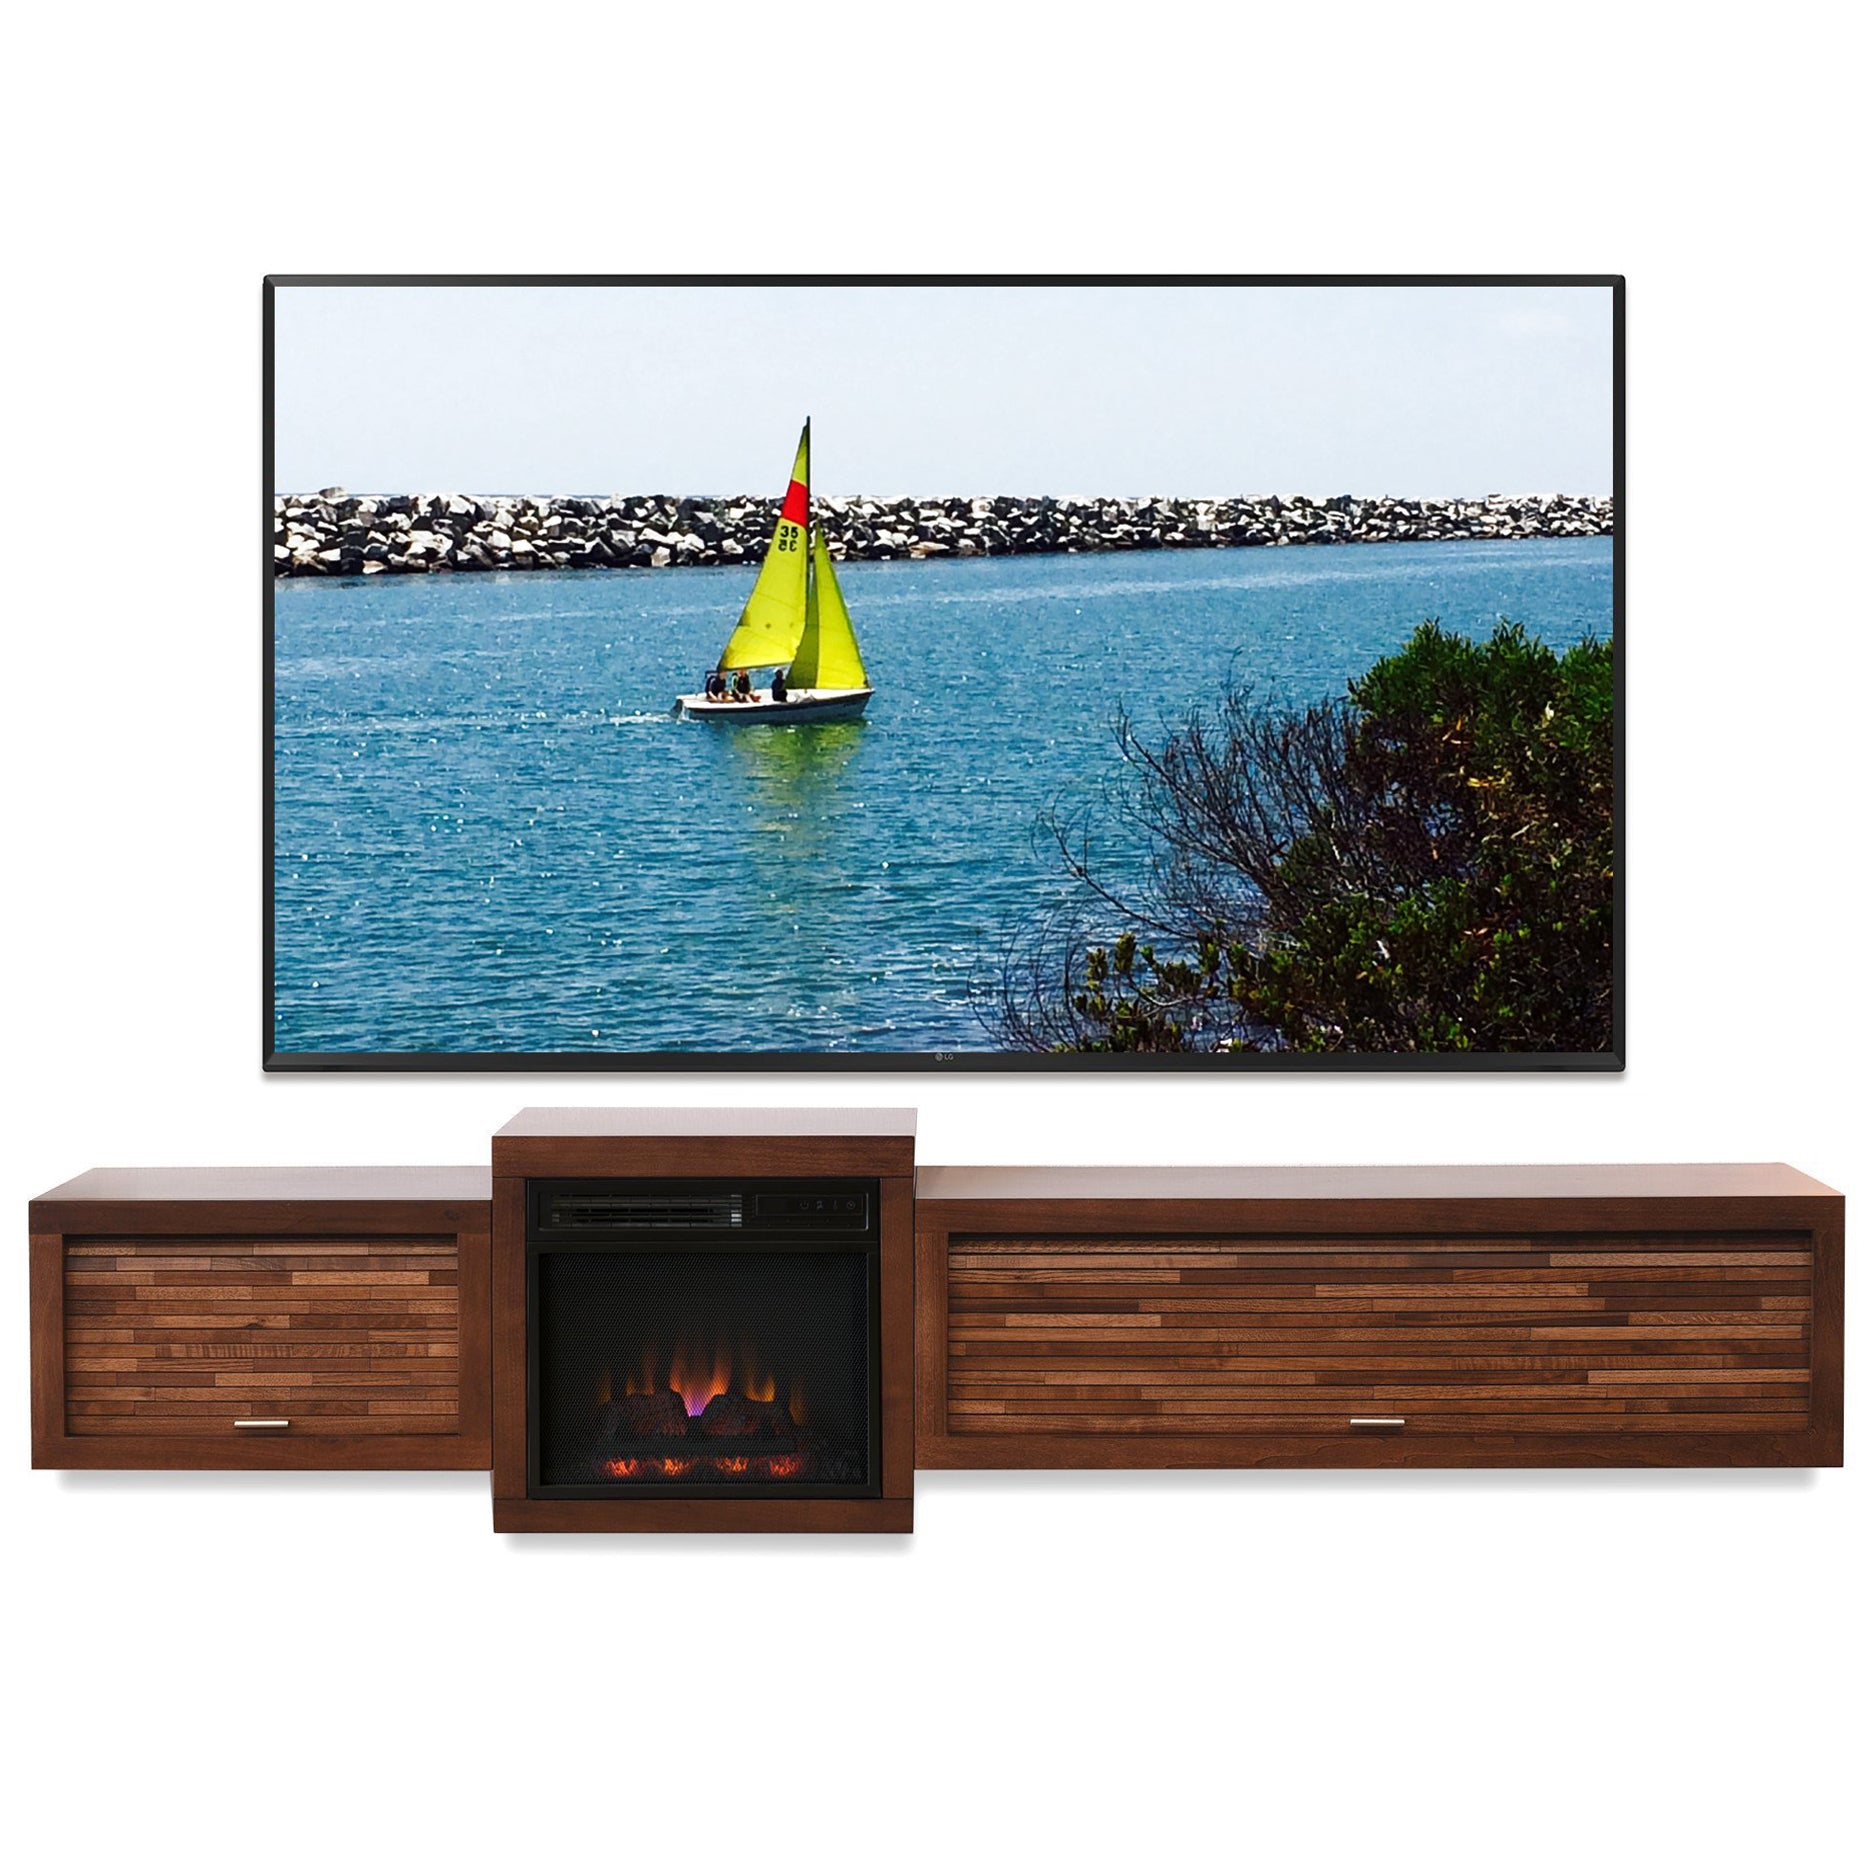 Fireplace TV Stands & Floating Wall Mount Consoles